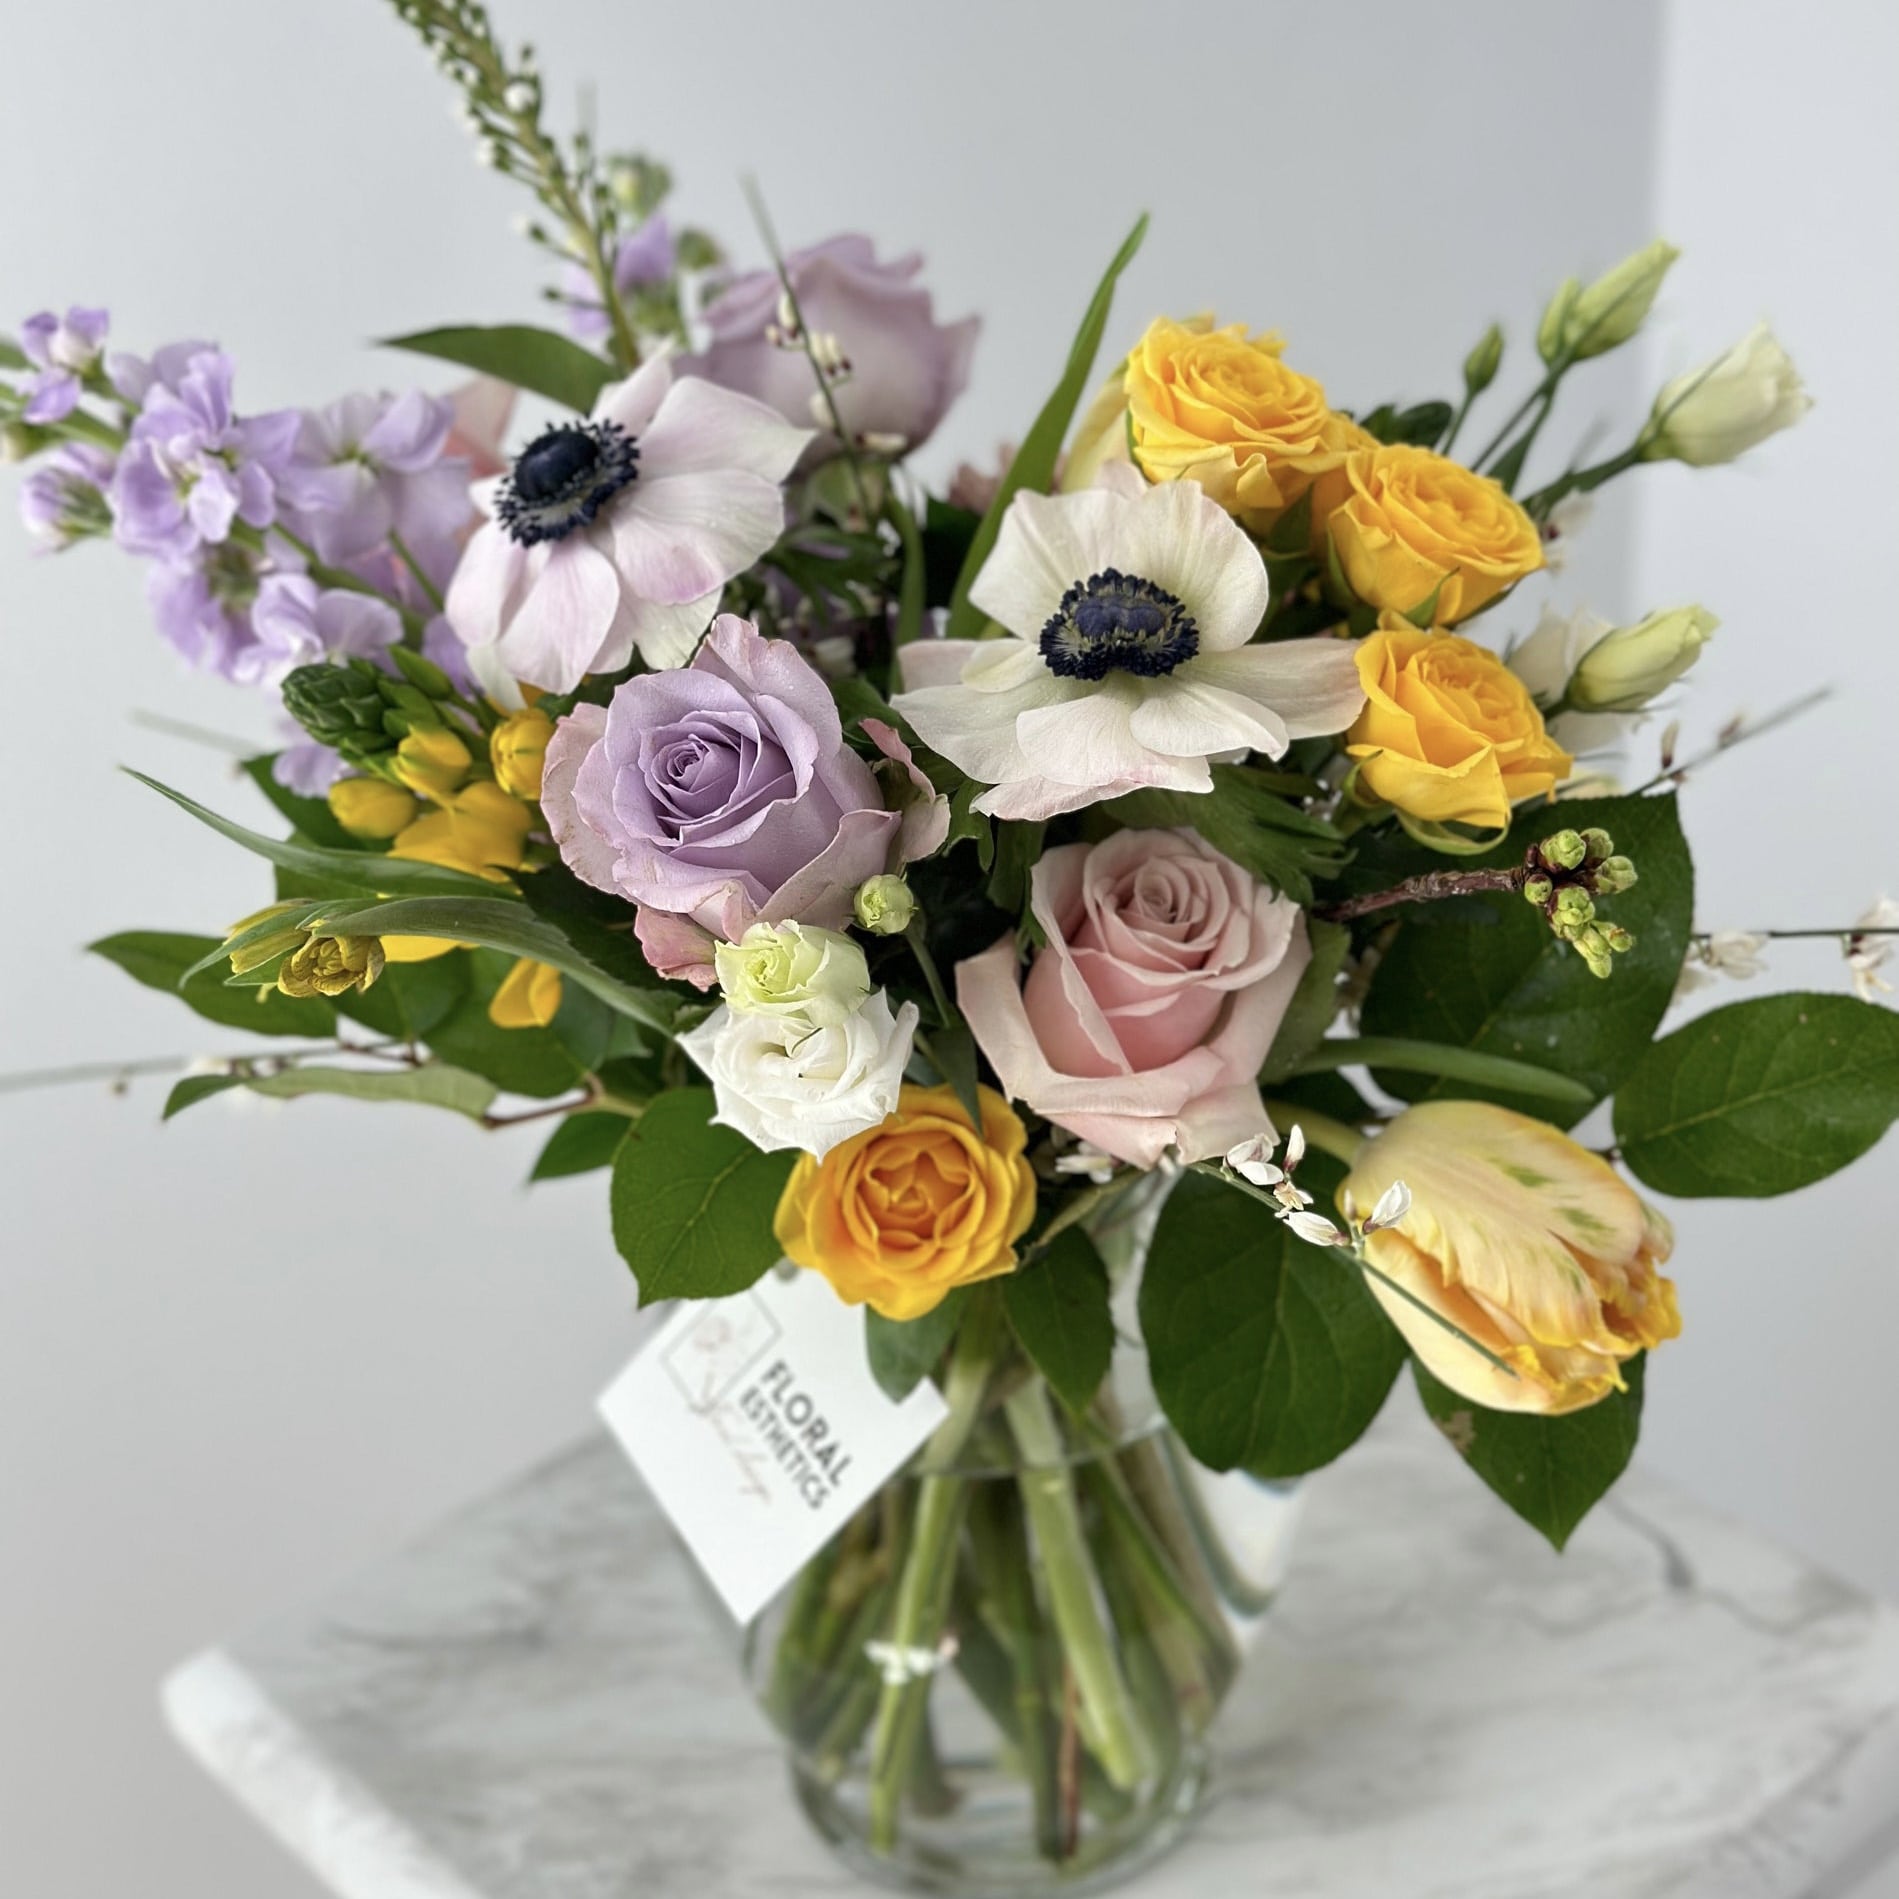 Spring flower arrangement in clear vase featuring white anemones, purple roses, yellow spray roses, yellow parrot tulips, genistra, freesia and more